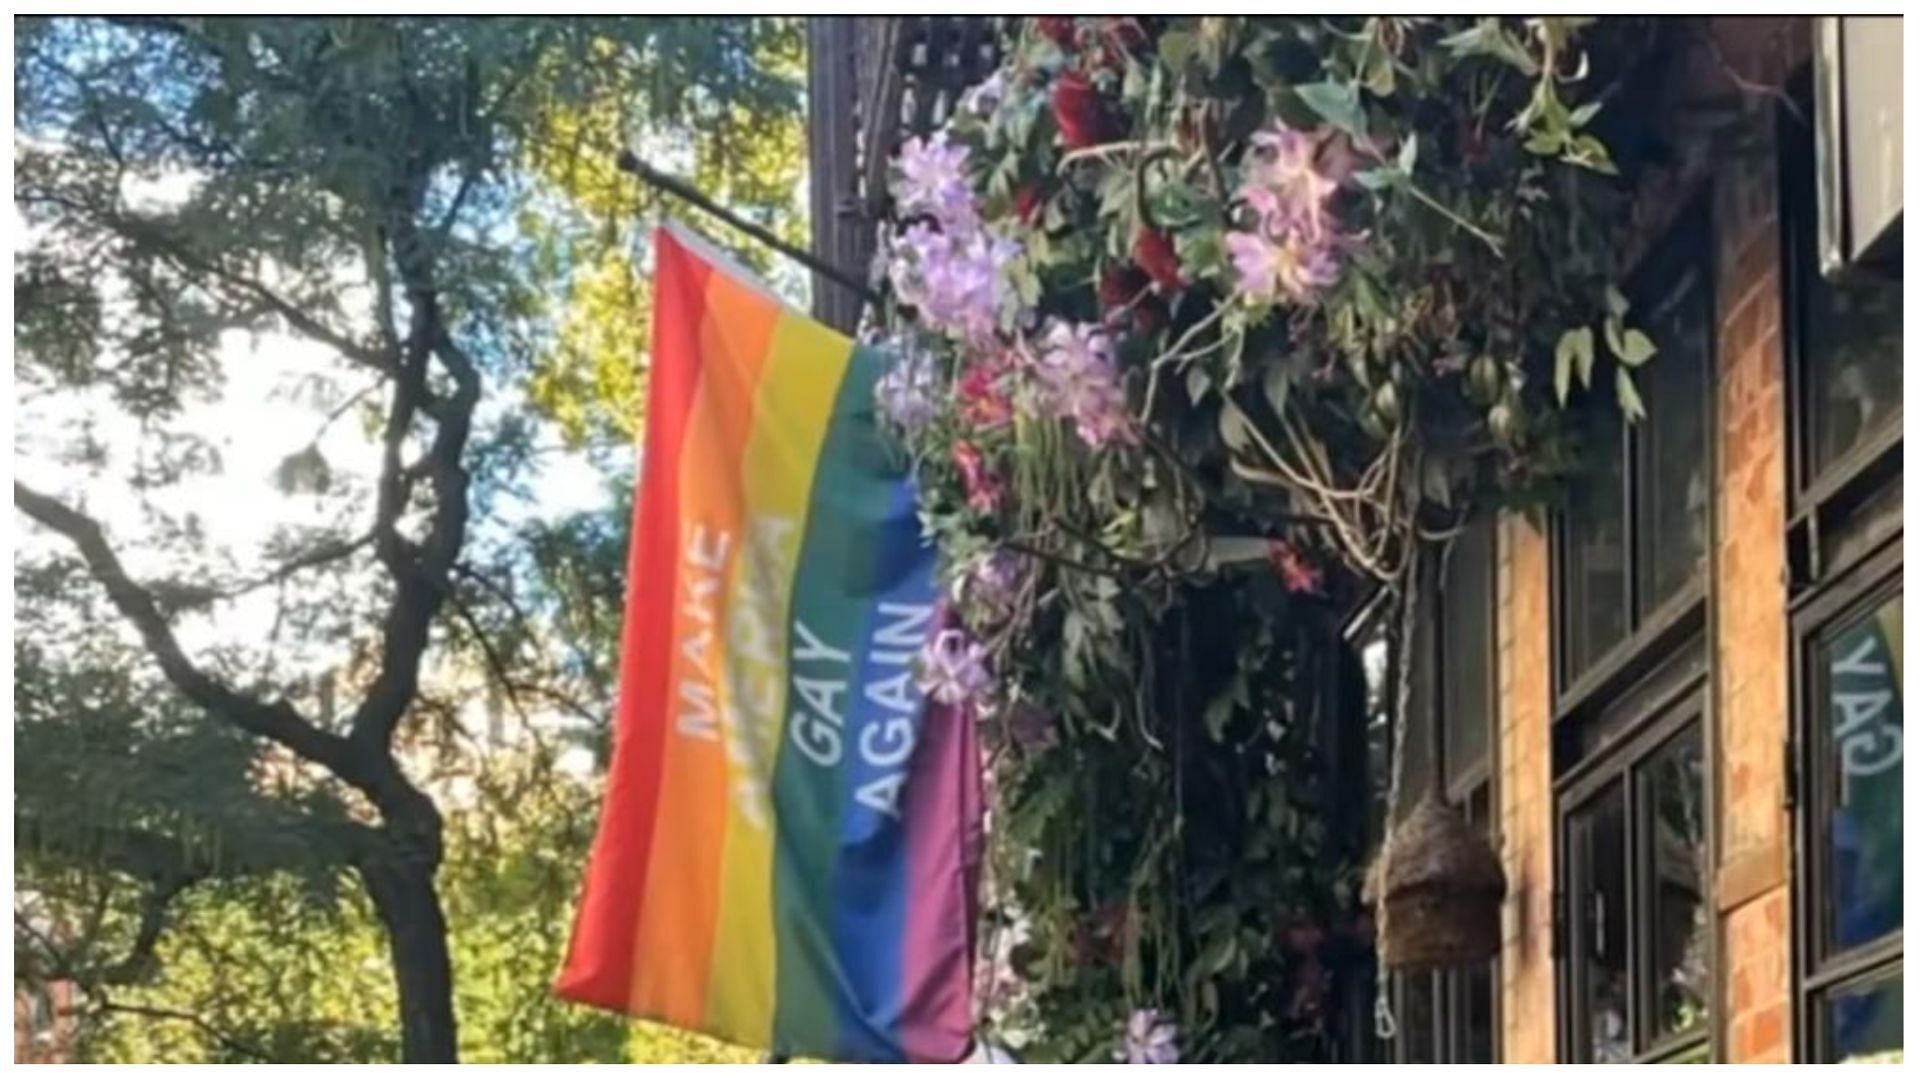 A pride flag was set on fire by a 35-year-old woman, (Image via CBS New York/YouTube)